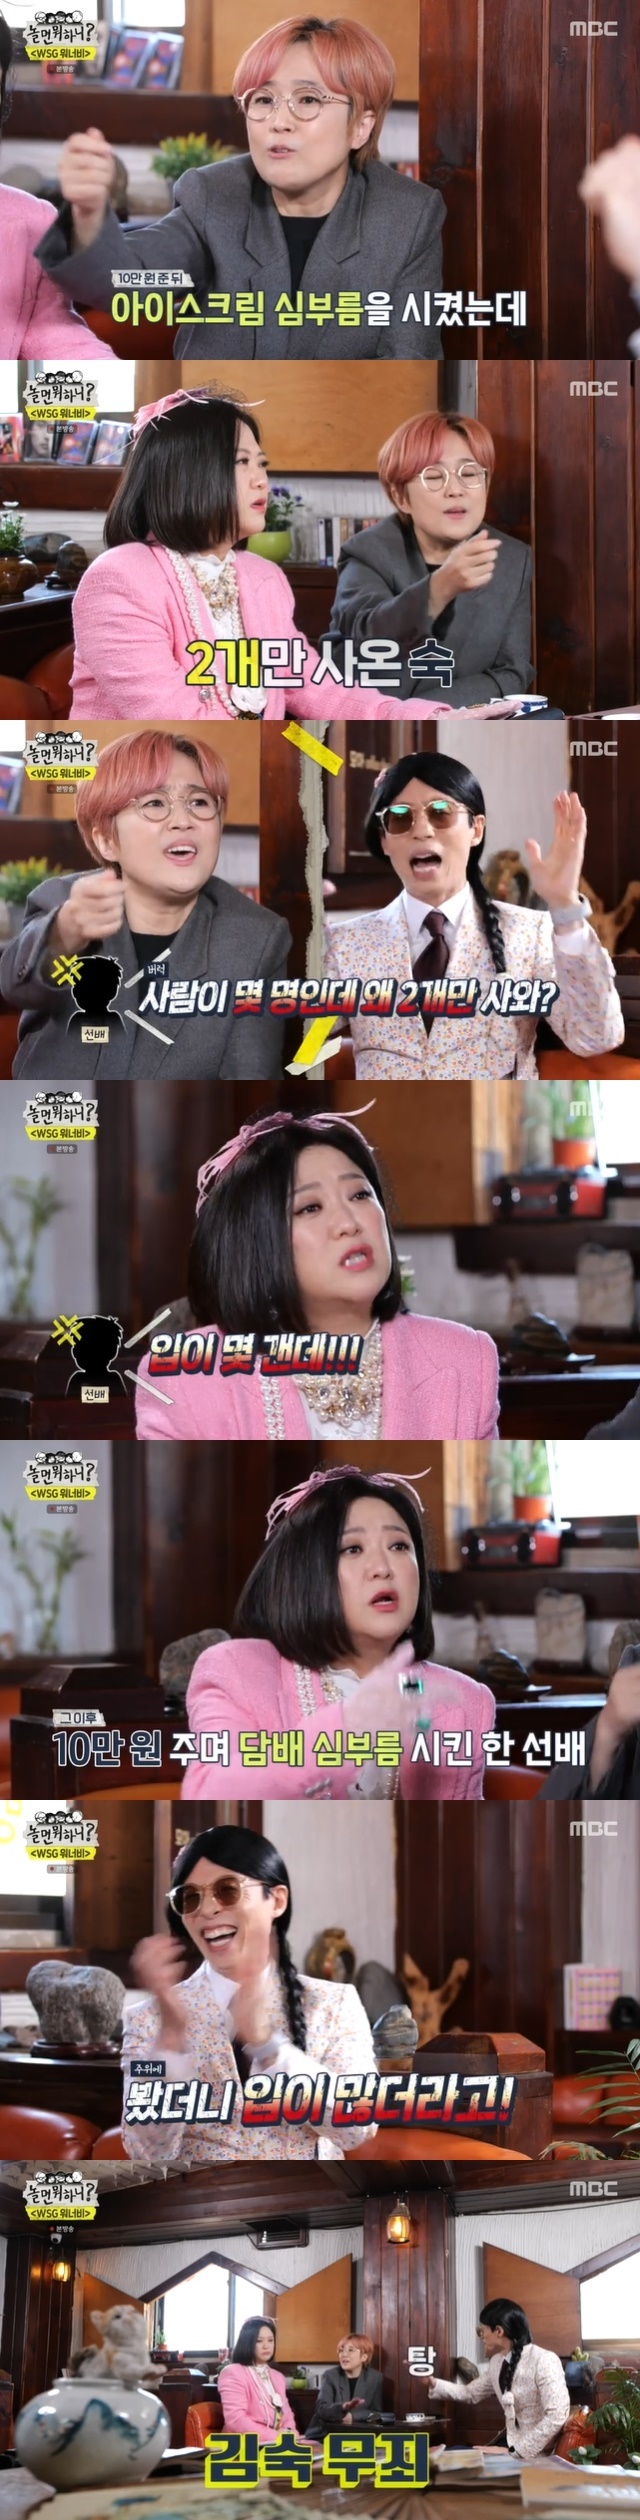 Kim Sook was acquitted of the 100,000 won cigarette Fuben na Benriya case for 20 years.In the 133rd MBC entertainment Hangout with Yo (hereinafter referred to as What to Play) broadcast on April 16, four major agencies of Yupalbong (Yoo Jae-Suk) were invited.On that day, Yupalbong was introduced to Issa Elena (Kim Sook) on behalf of Song Eun-yi, the head of busy media labsysso.Yupalbong said, Kim Soo-yong said Kim Sooks line in the rumor that he heard.Soon after, when Lee Young-ja came out, Elena quipped, Lee Young-ja is my line too.Song Eun-yi said to Elena, Is it okay? Ill watch the broadcast? And then he said, The phone will come exactly. Its silver.We have to understand. I am not angry now. He predicted Lee Young-jas reaction and laughed at the vocal simulation.Elena boasted that Lee Young-ja is the only one who forgives Kim Sook.Yoo Jae-Suk said, Since ancient times, Kim Sook has been rumored to be a back-and-forth between seniors.Even Kim Sook was in the aisle, and some seniors went back. I bought 100,000 won worth of cigarettes. Elena said, I thought I was buying it as soon as I gave it. If I asked you to buy a cigarette for 100,000 won, you would buy 100,000 won.Song Eun-yi said that there was a job before that. I gave 100,000 won to my seniors while buying ice cream.Kim Sook bought two, so he said, I got a few mouths (and I got it kicked), Elena said, I bowed my head and got confused among those many seniors.After that, my mother gave me 100,000 won and I had a lot of mouth when I saw it. So I bought 100 packs. 